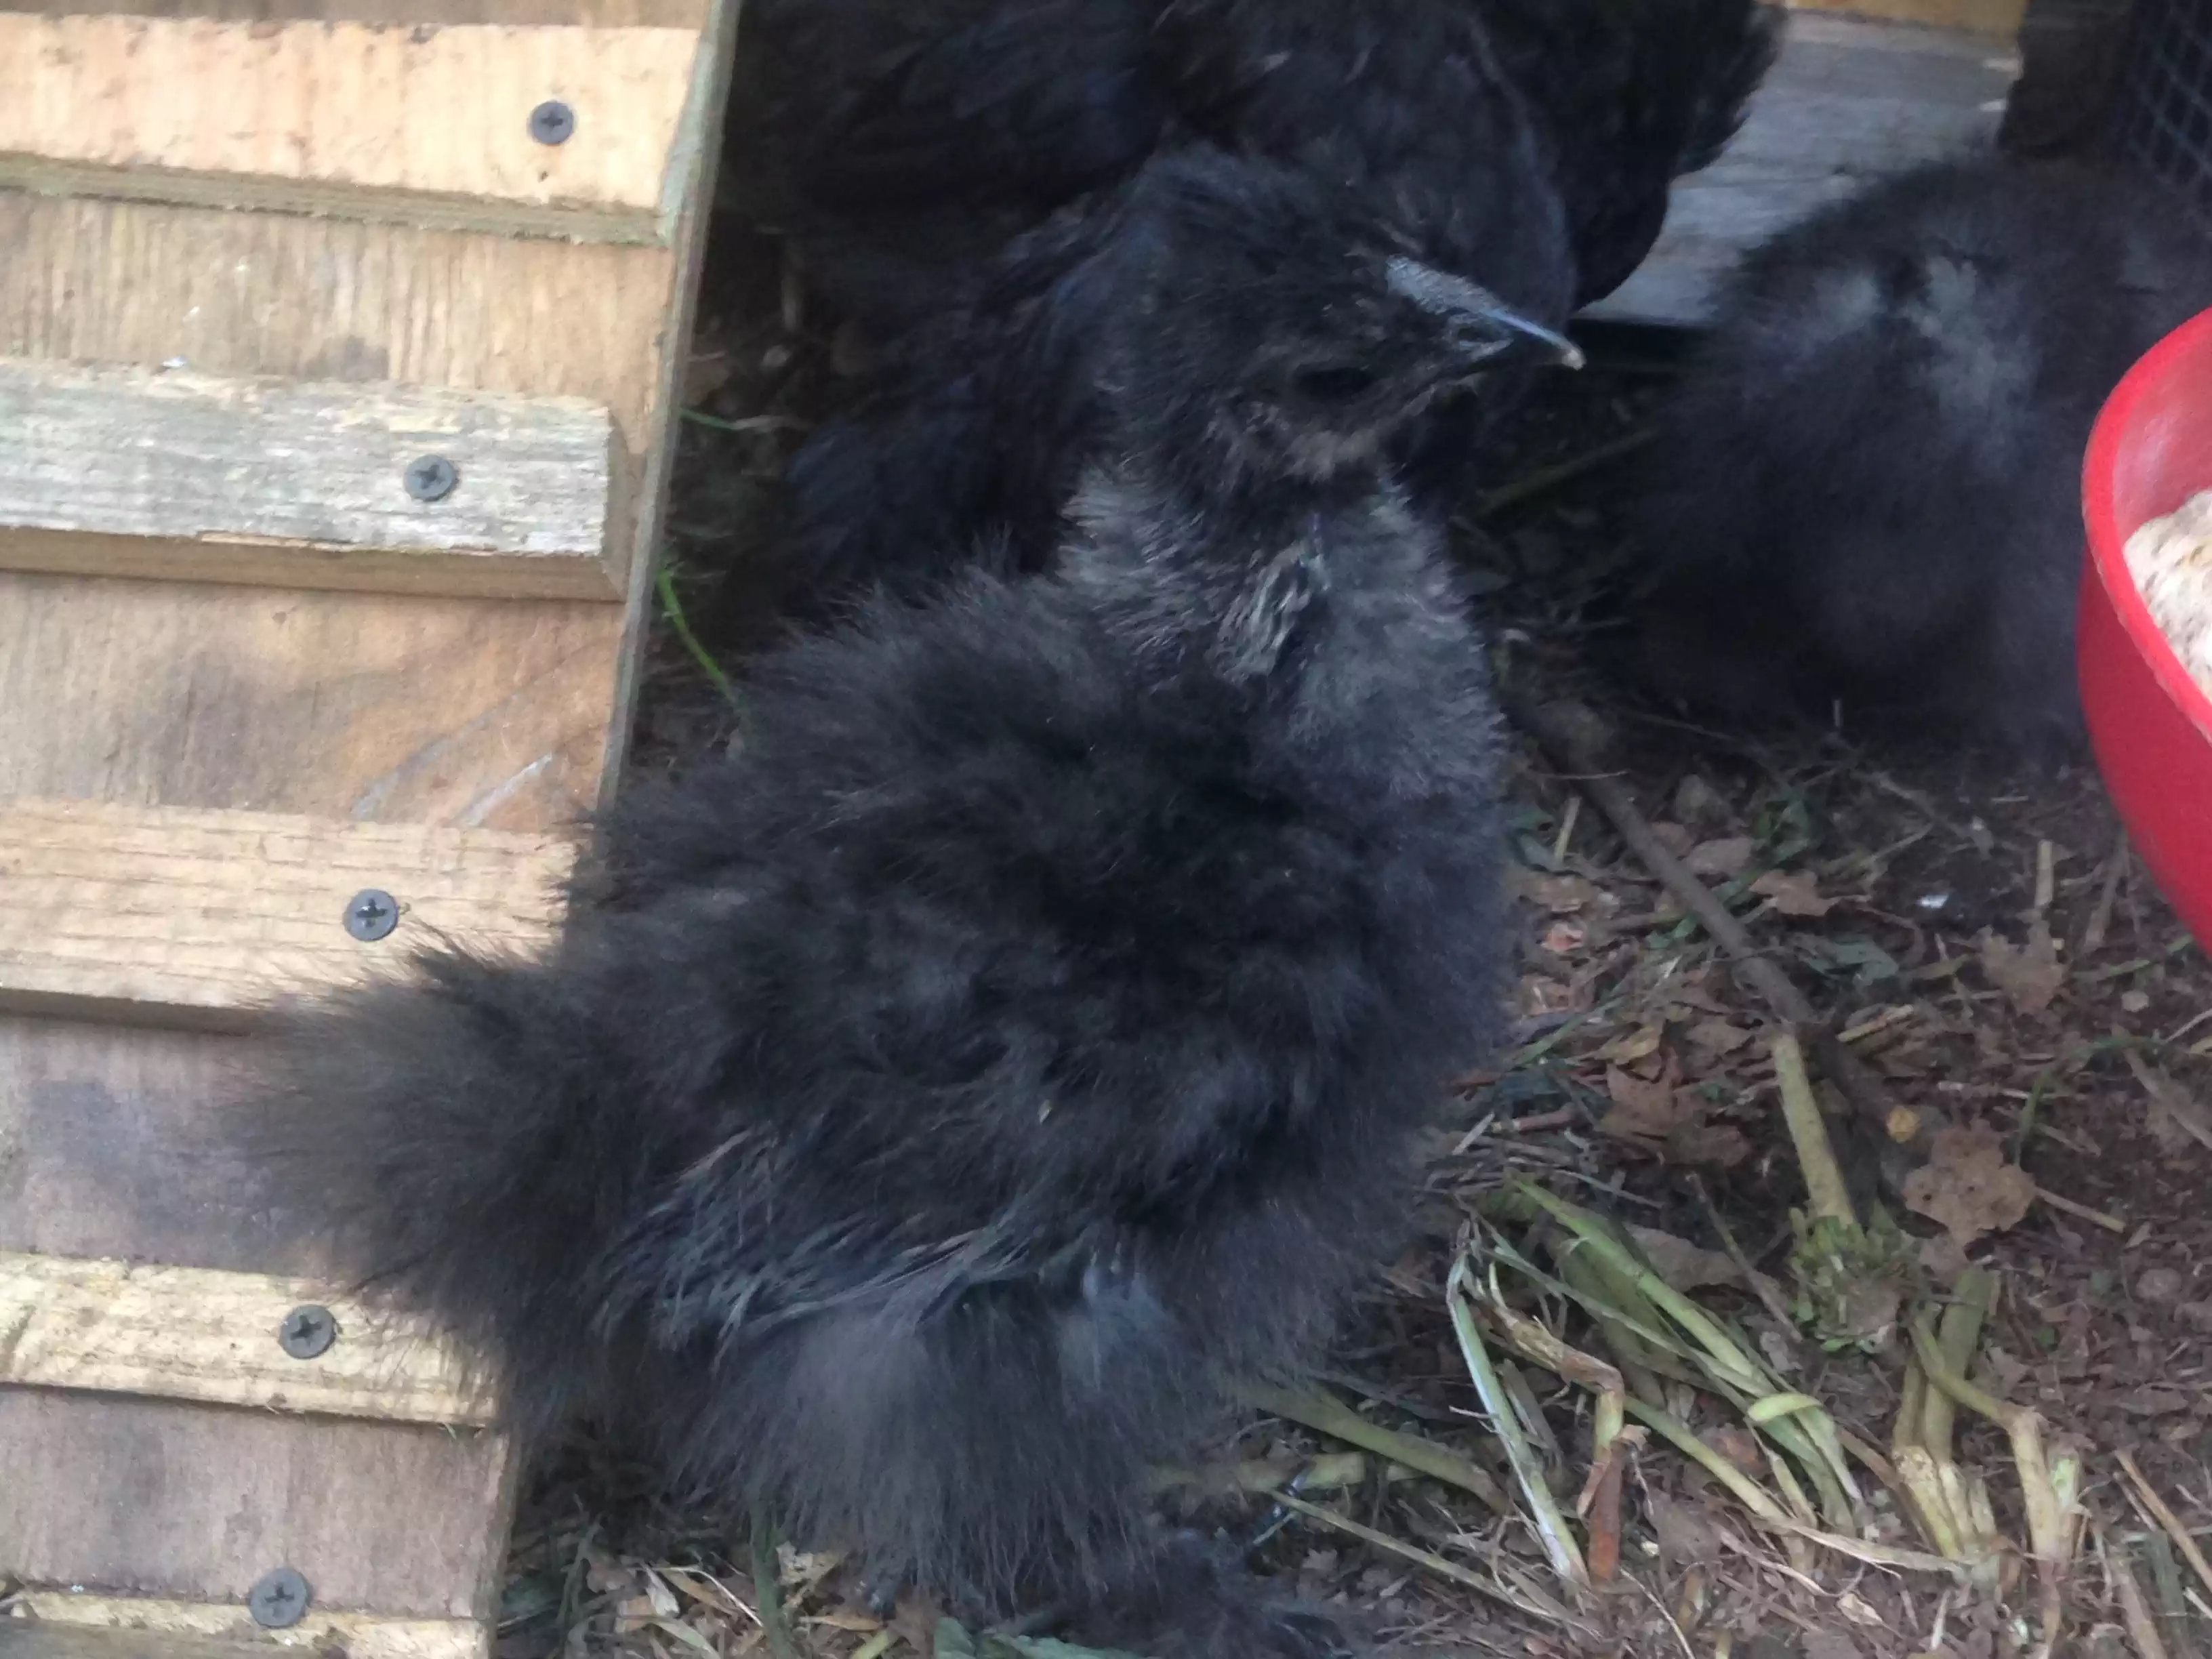 My little Raven - the smallest bird and the third Silkie